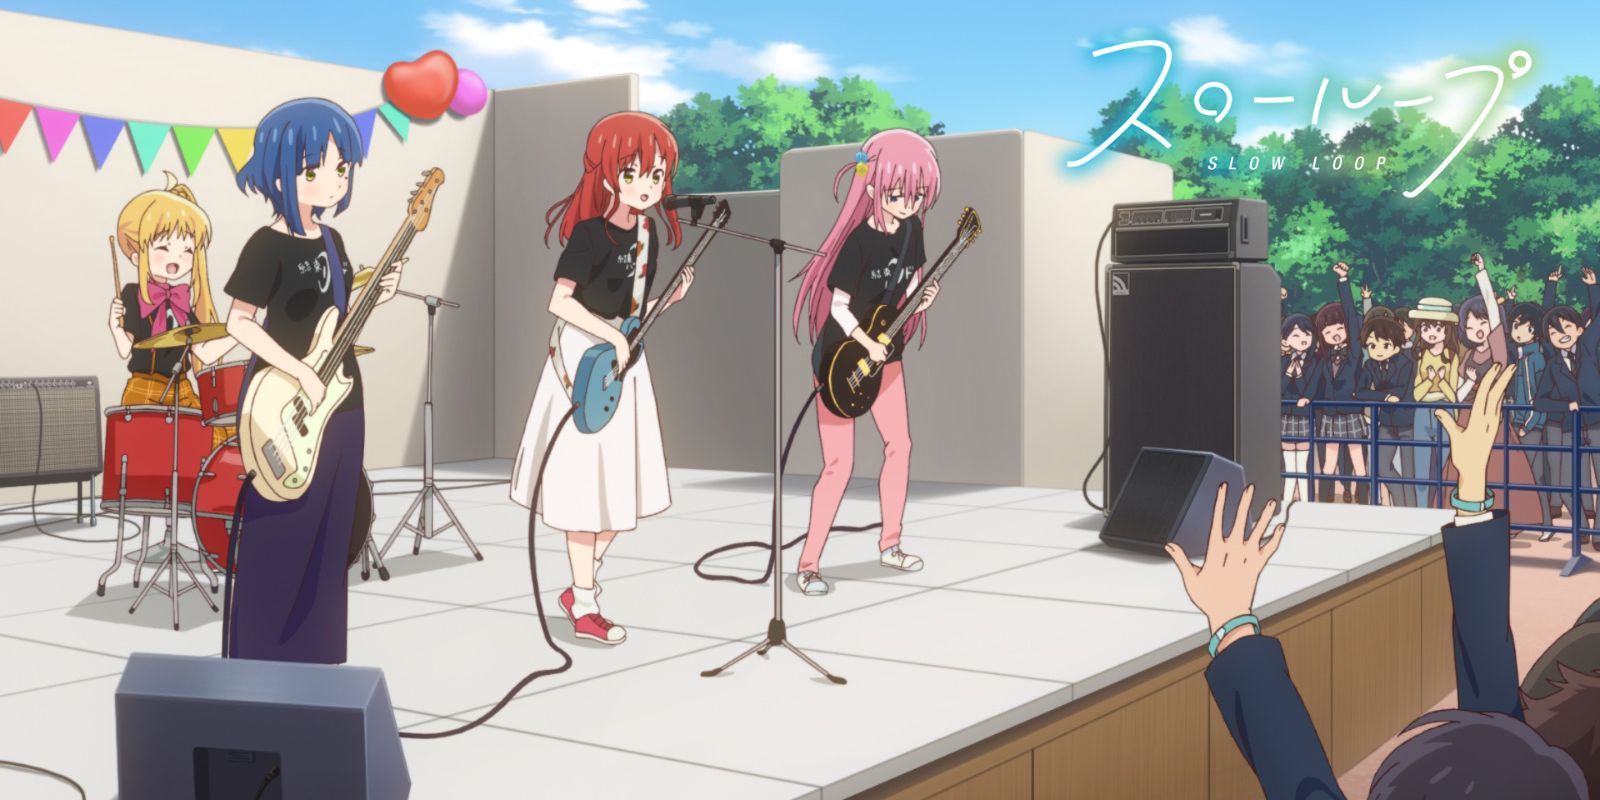 bocchi the rock cameo in slow loop kessoku band